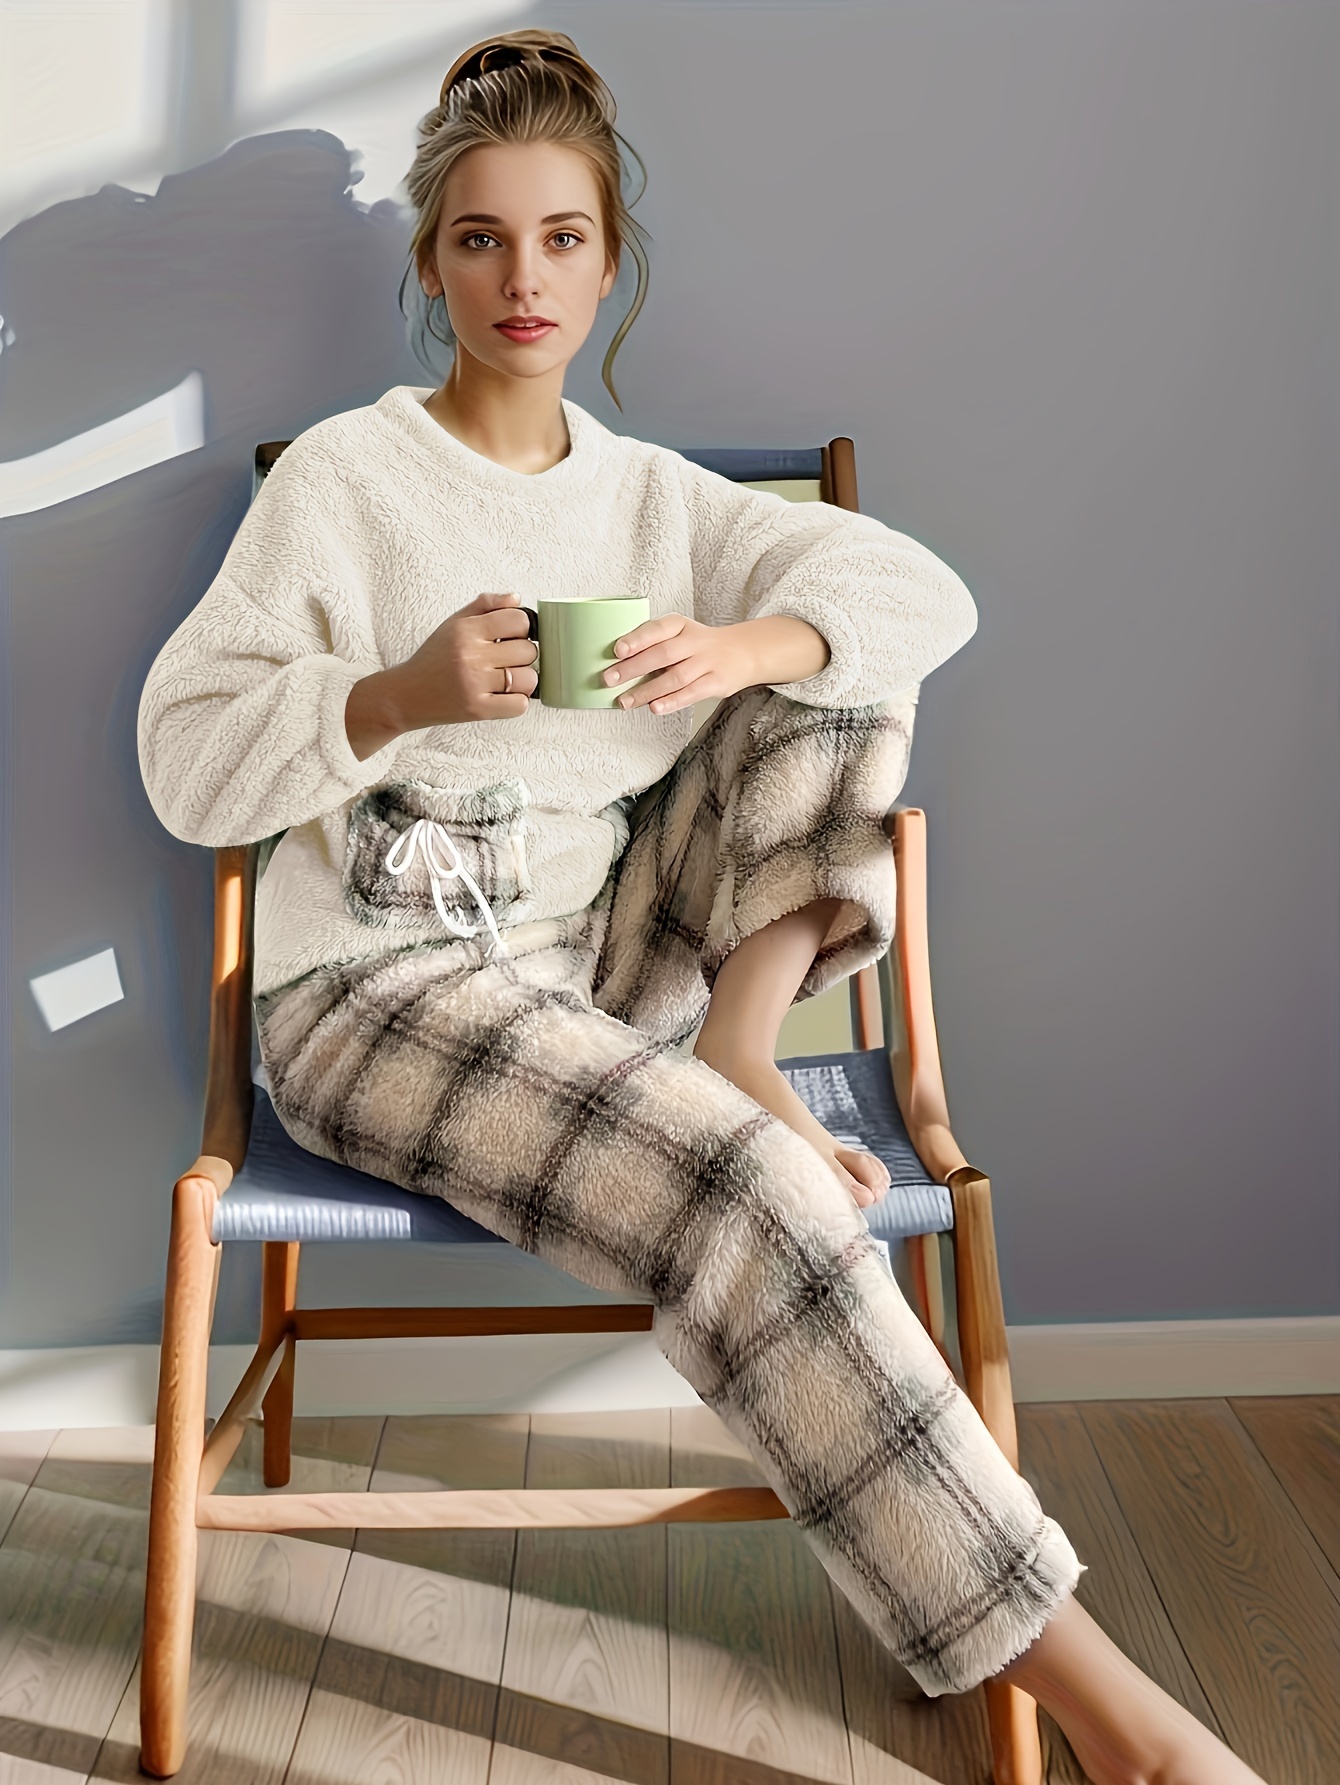 Woman dressed in comfy loungewear of grey color sitting in a cozy